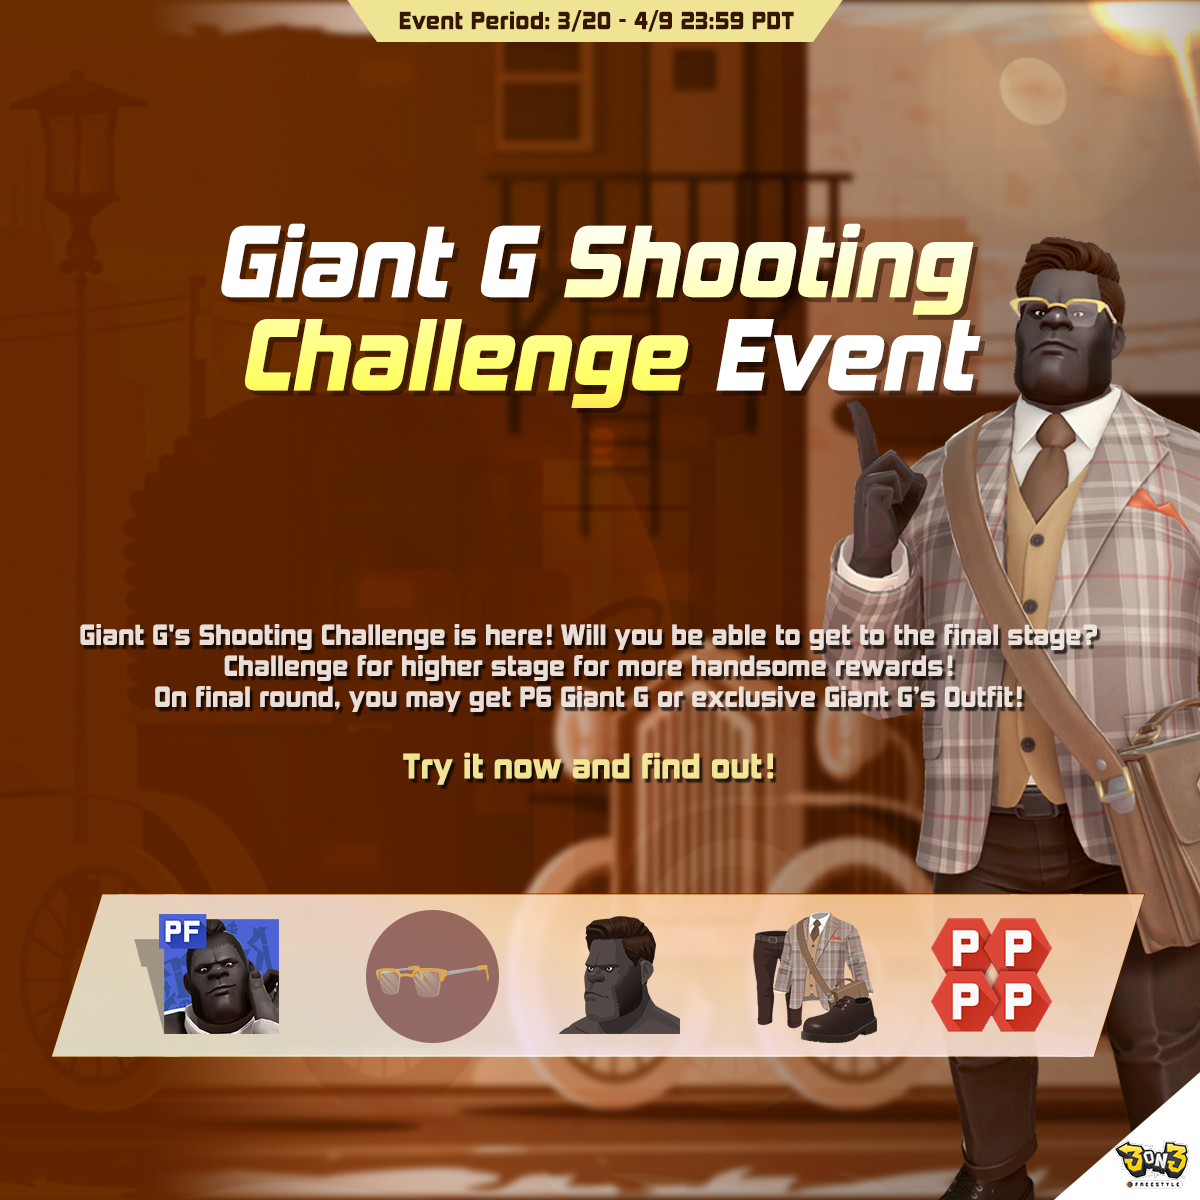 Get ready for the ultimate test of skill in the Giant G Shooting Challenge Event! Challenge yourself for higher stages and unlock even more handsome prizes! 📅 Event Period: 3/20 - 4/9, 23:59 PDT #videogame #StreetBasketball #3on3freestyle